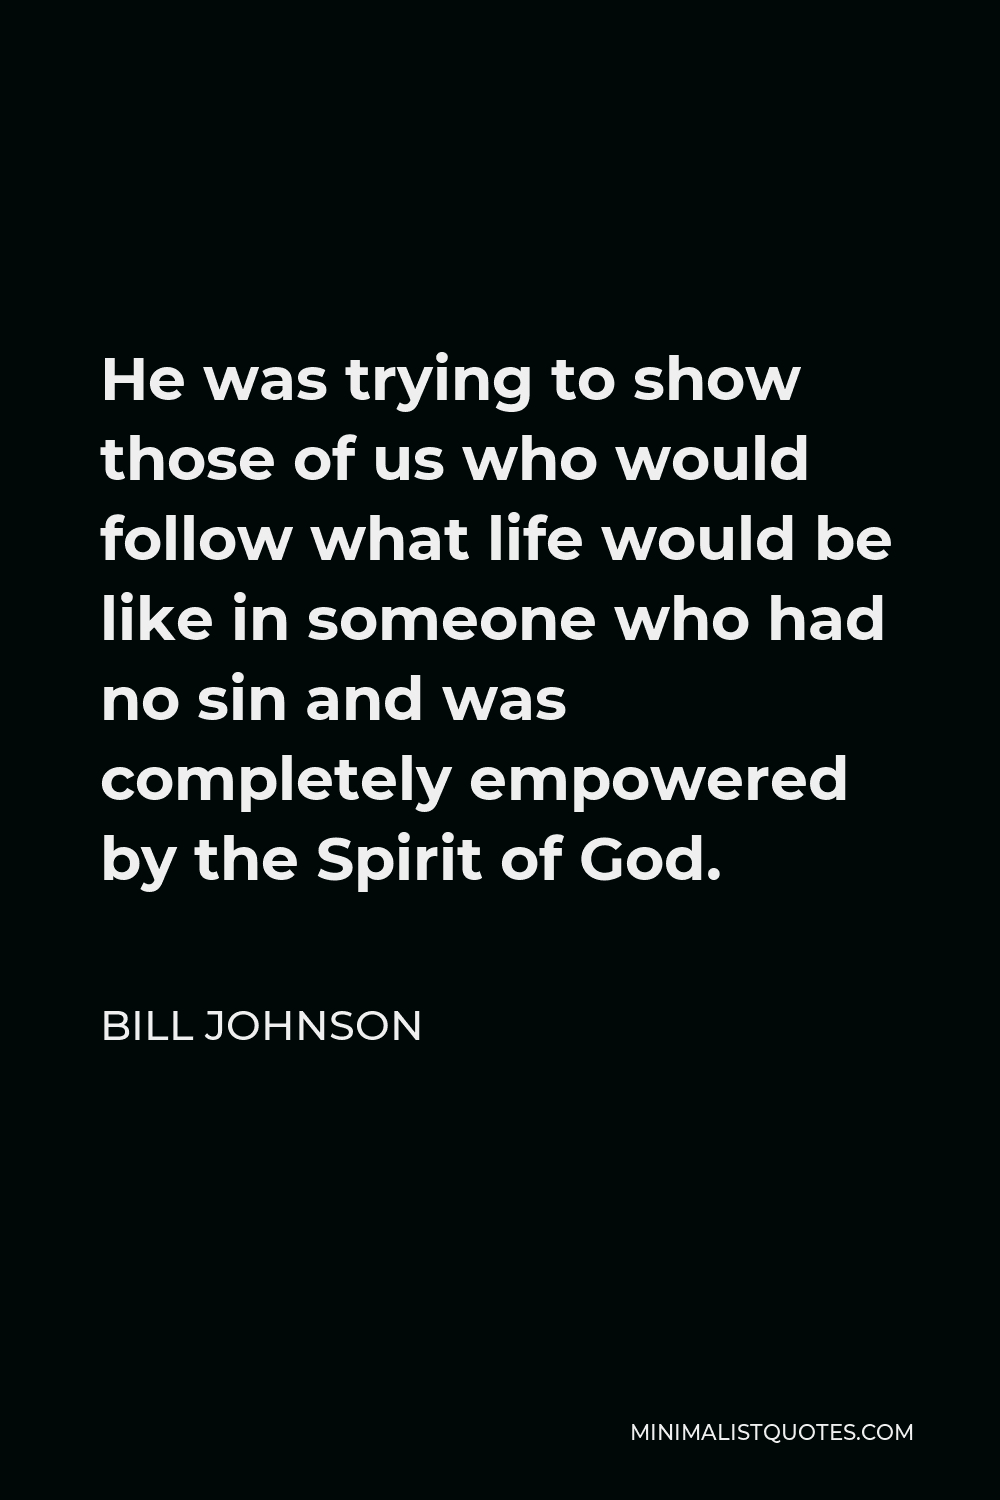 Bill Johnson Quote - He was trying to show those of us who would follow what life would be like in someone who had no sin and was completely empowered by the Spirit of God.